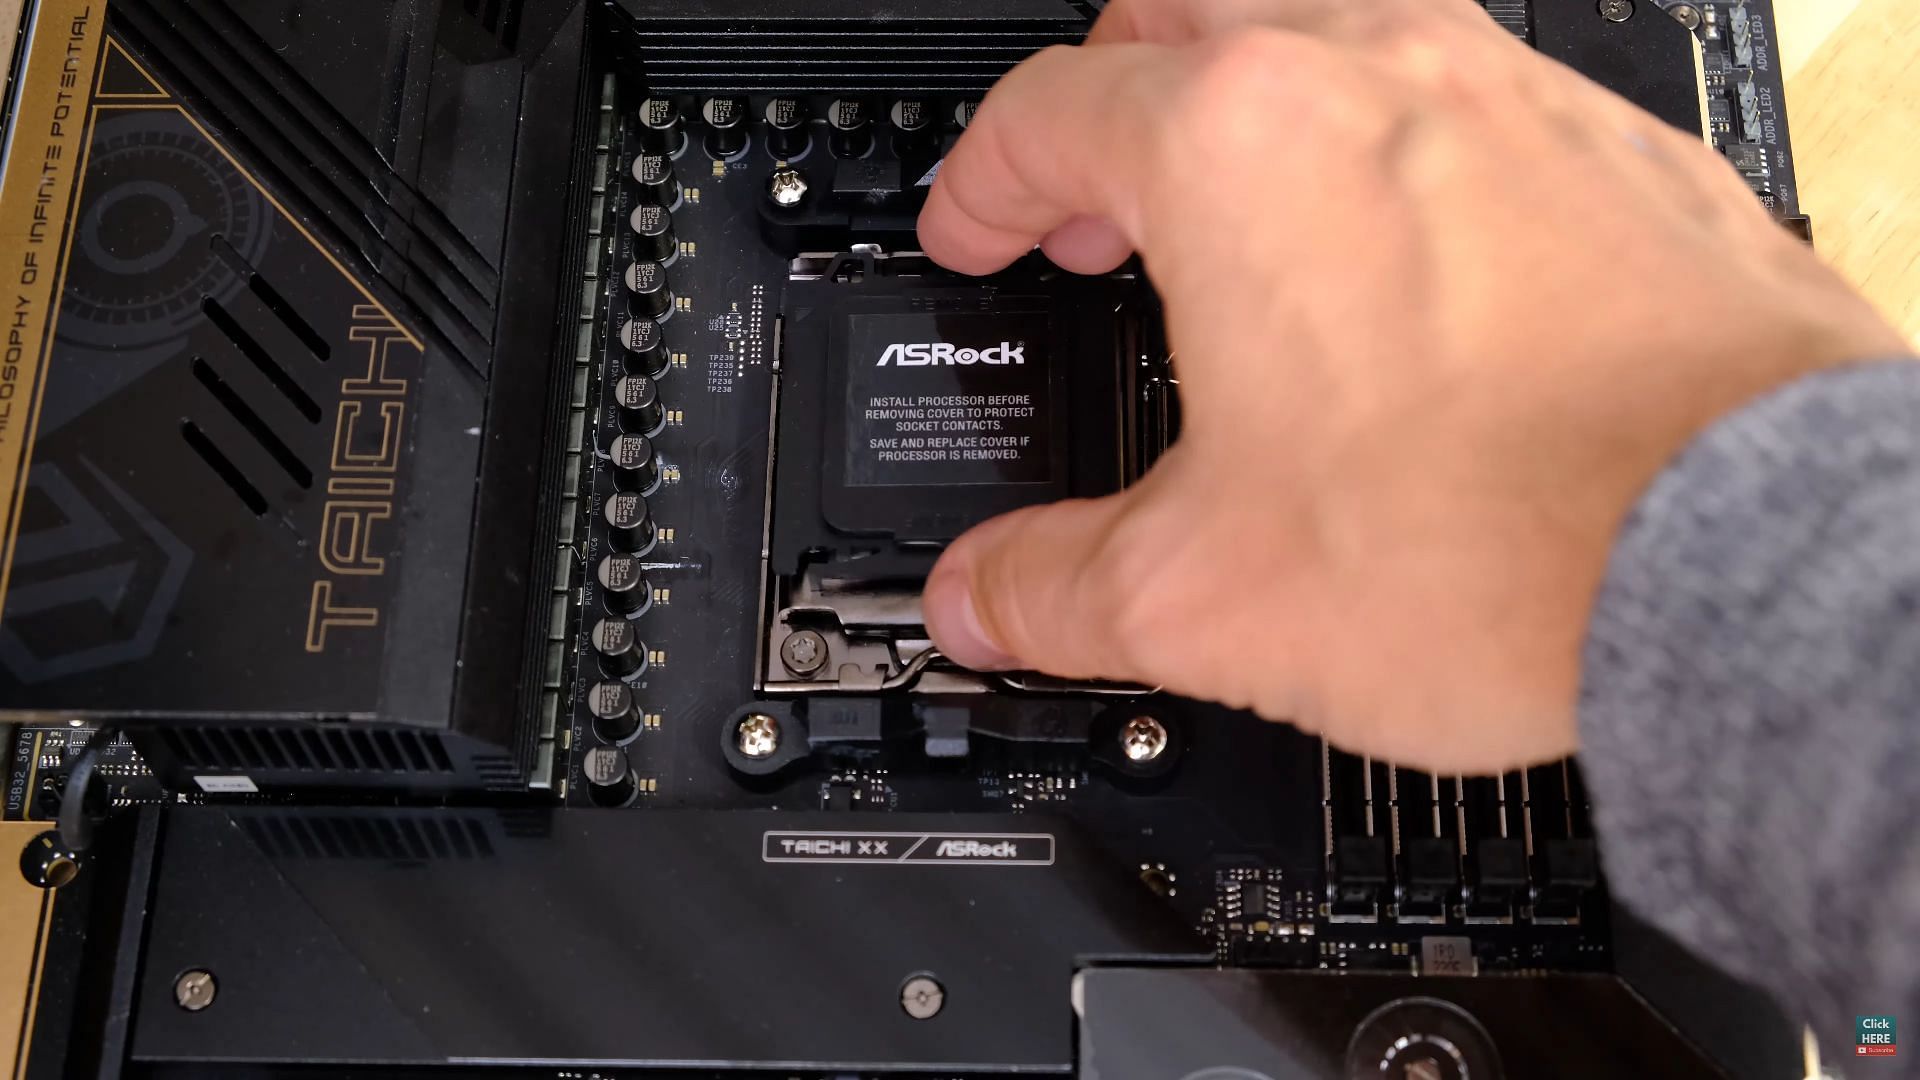 The plastic cover pops off once the chip has been successfully installed (Image via CrazyTechLab/YouTube)